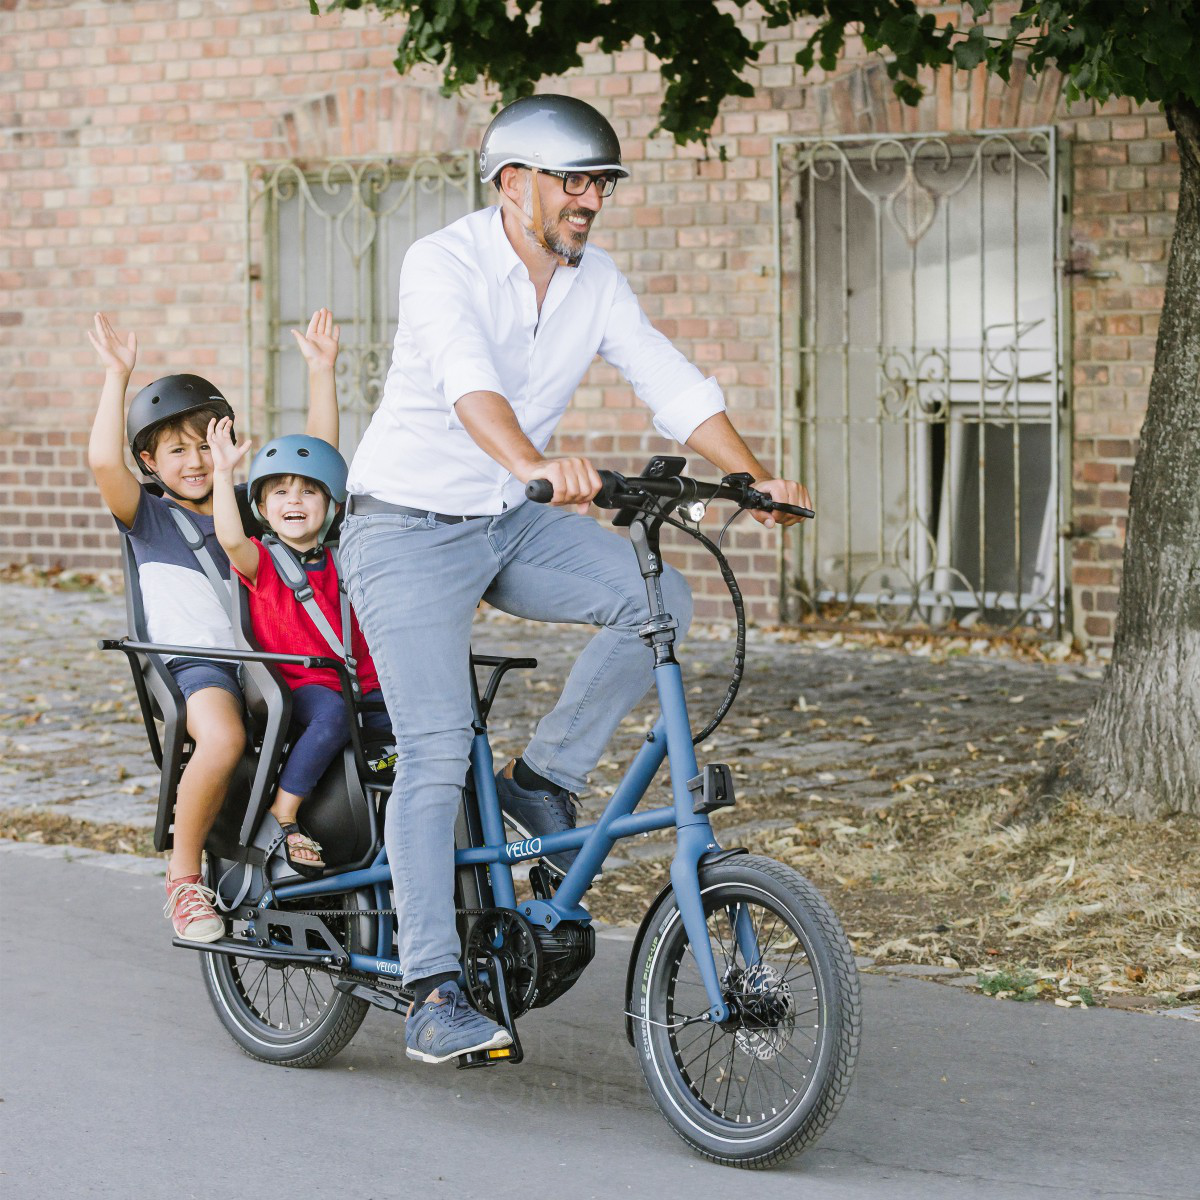 VELLO SUB: The Family Van Among Sustainable Means of Transport